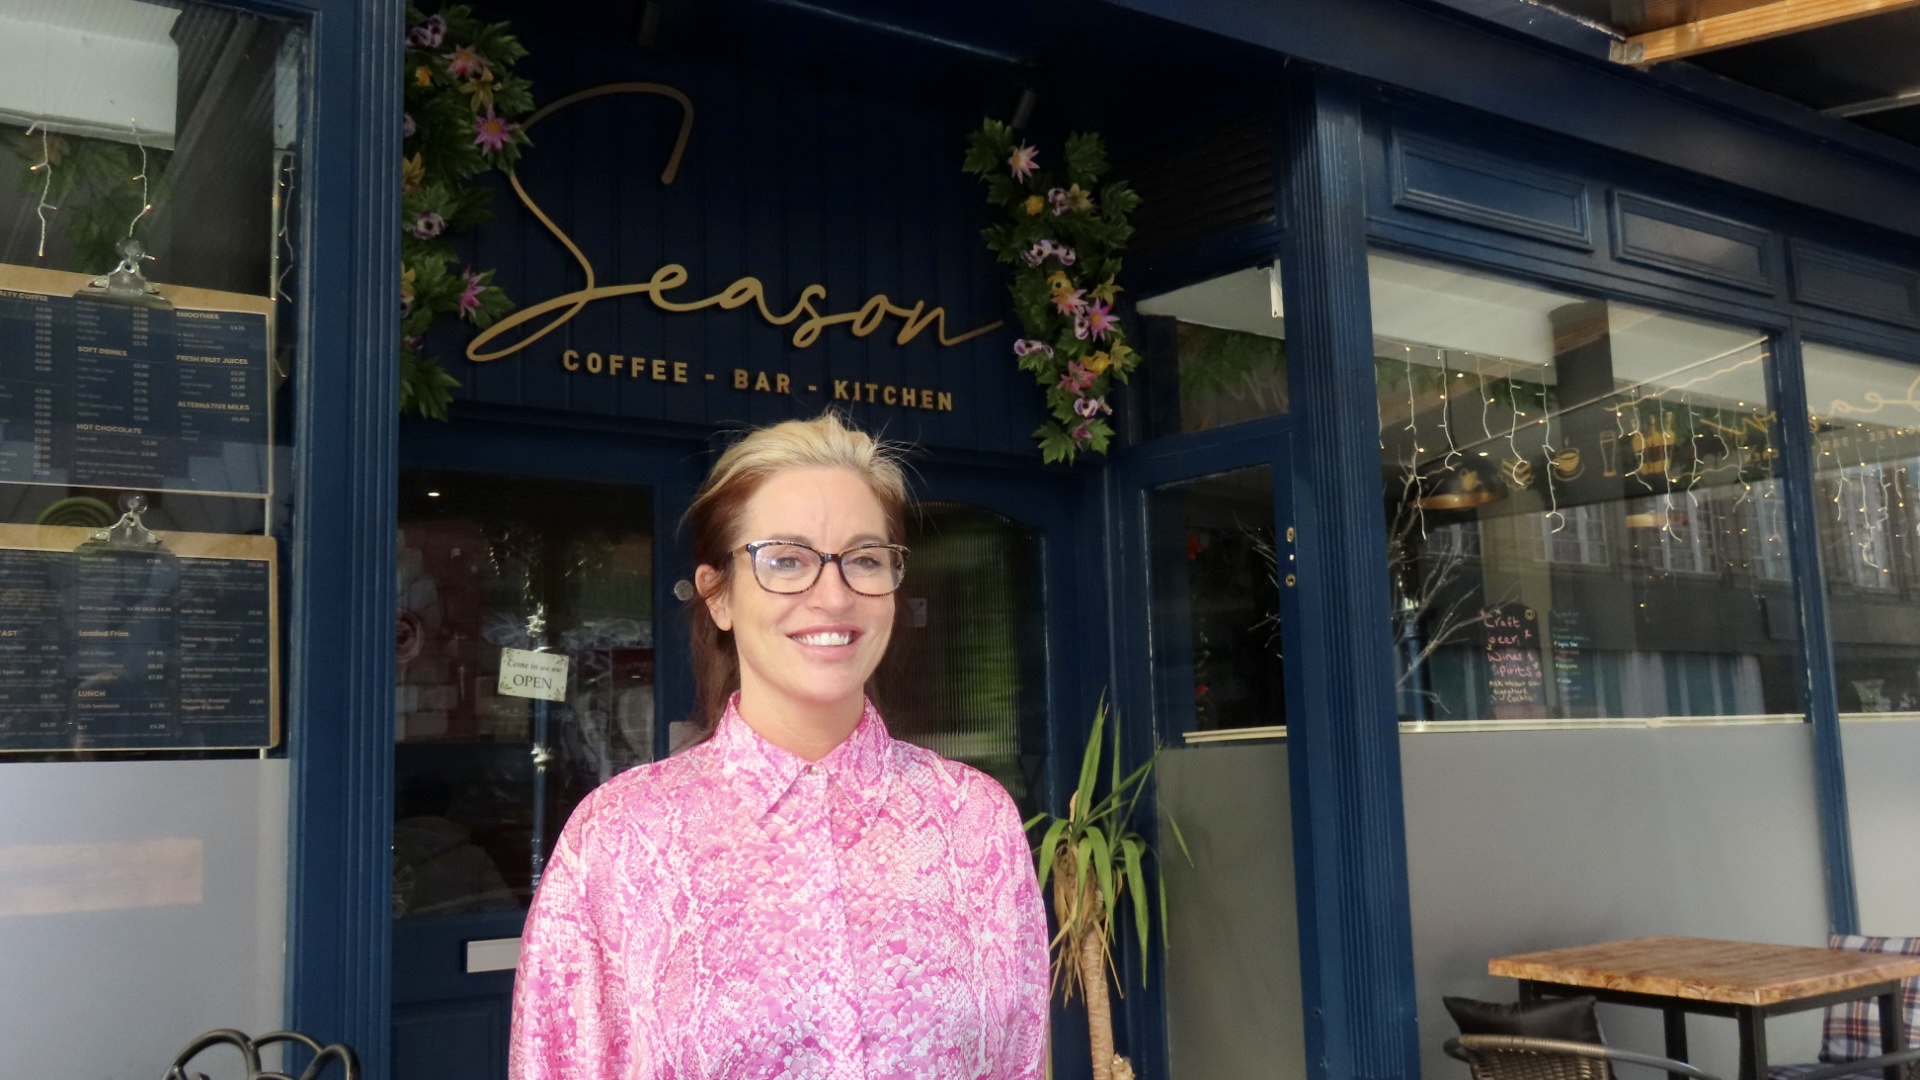 Michelle Caswell, who owns Season Coffee, Bar and Kitchen on King Street, Southport. Photo by Andrew Brown Stand Up For Southport